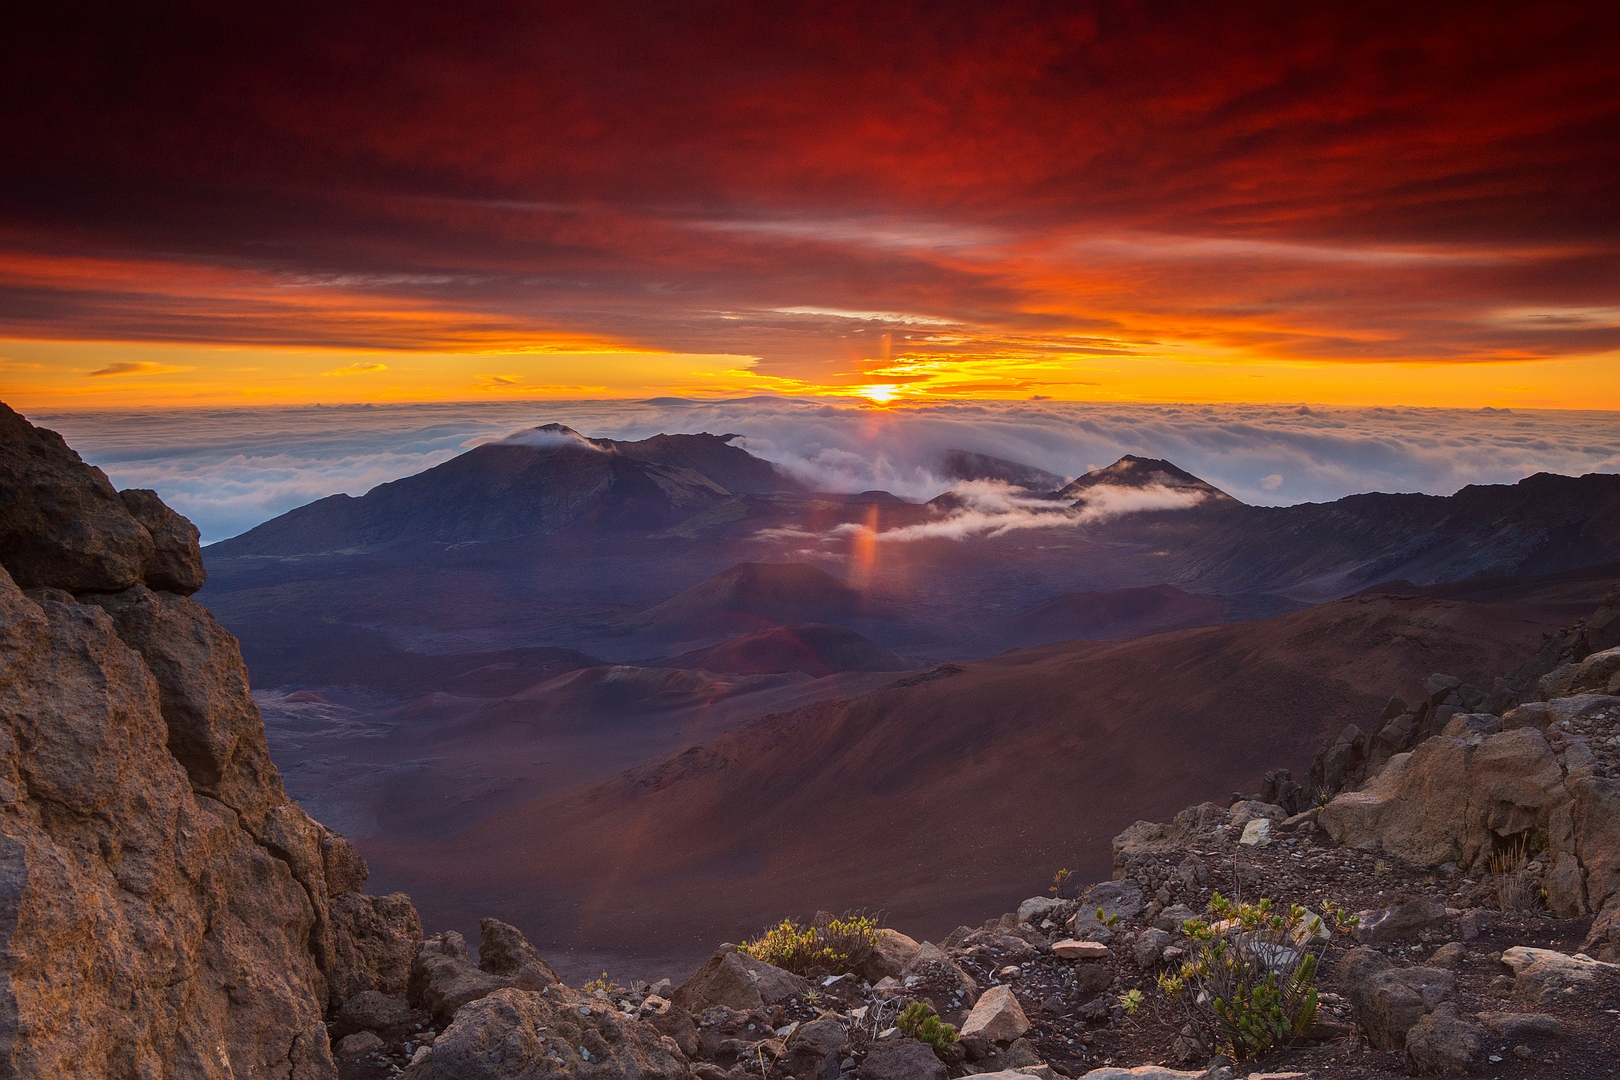 A sunset scene from a mountain top looking towards the setting sun with cloud coving lower mountains in the distance